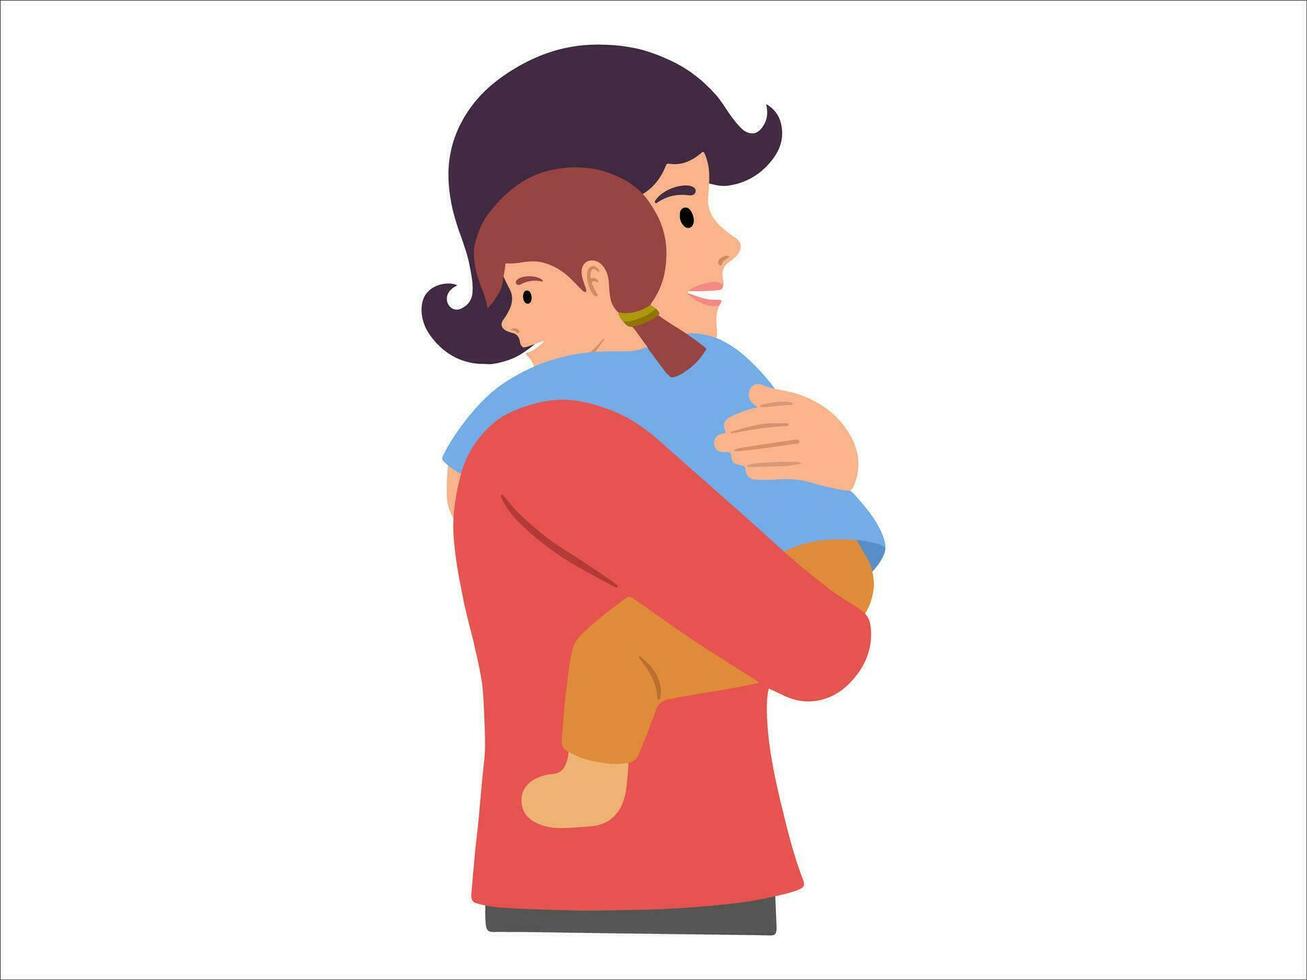 Mother holding baby or avatar icon illustration vector